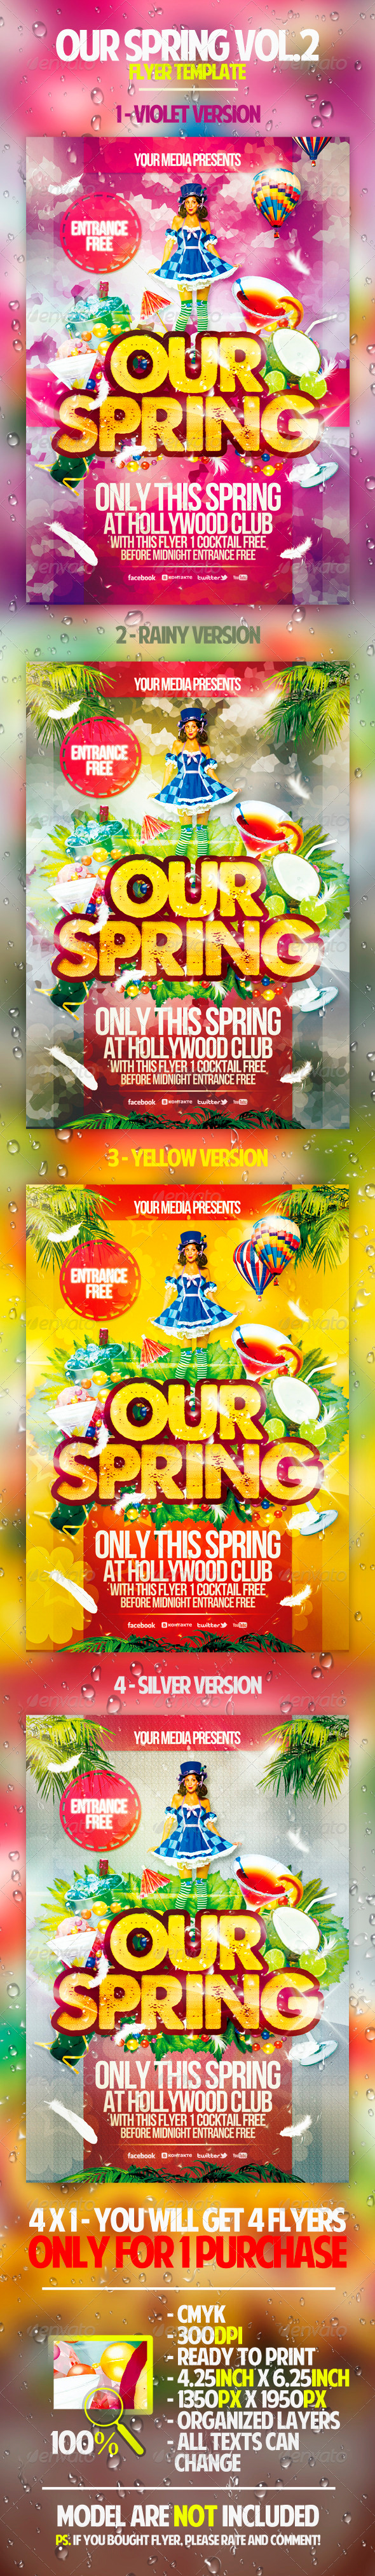 Our Spring Vol.2 Flyer Template